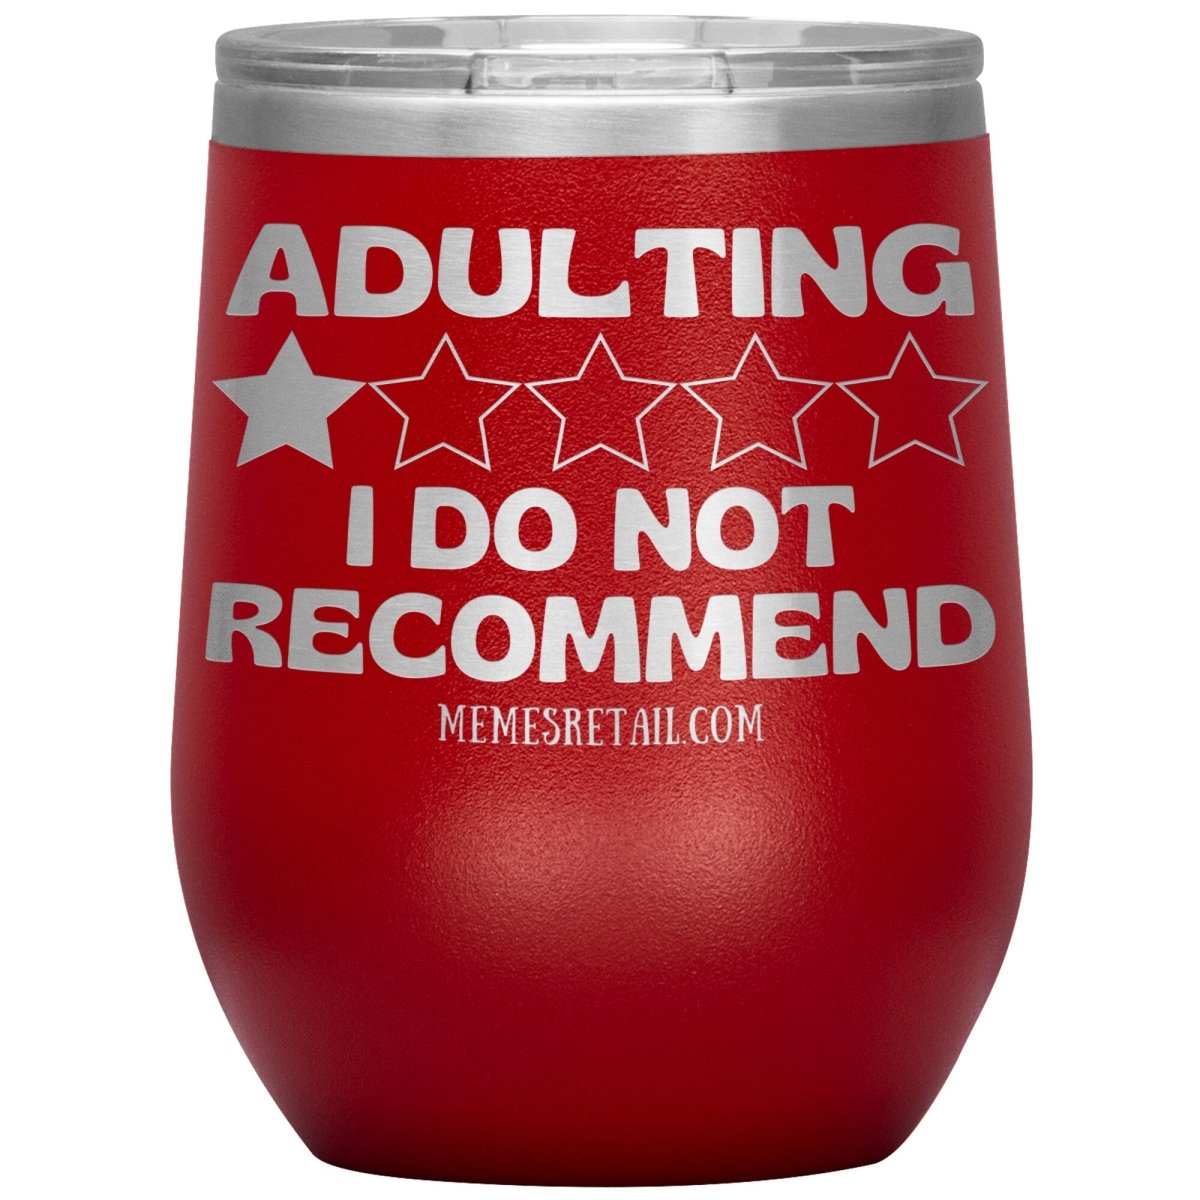 Adulting, I Do Not Recommend 12oz, 20oz, & 30oz Tumblers, 12oz Wine Insulated Tumbler / Red - MemesRetail.com